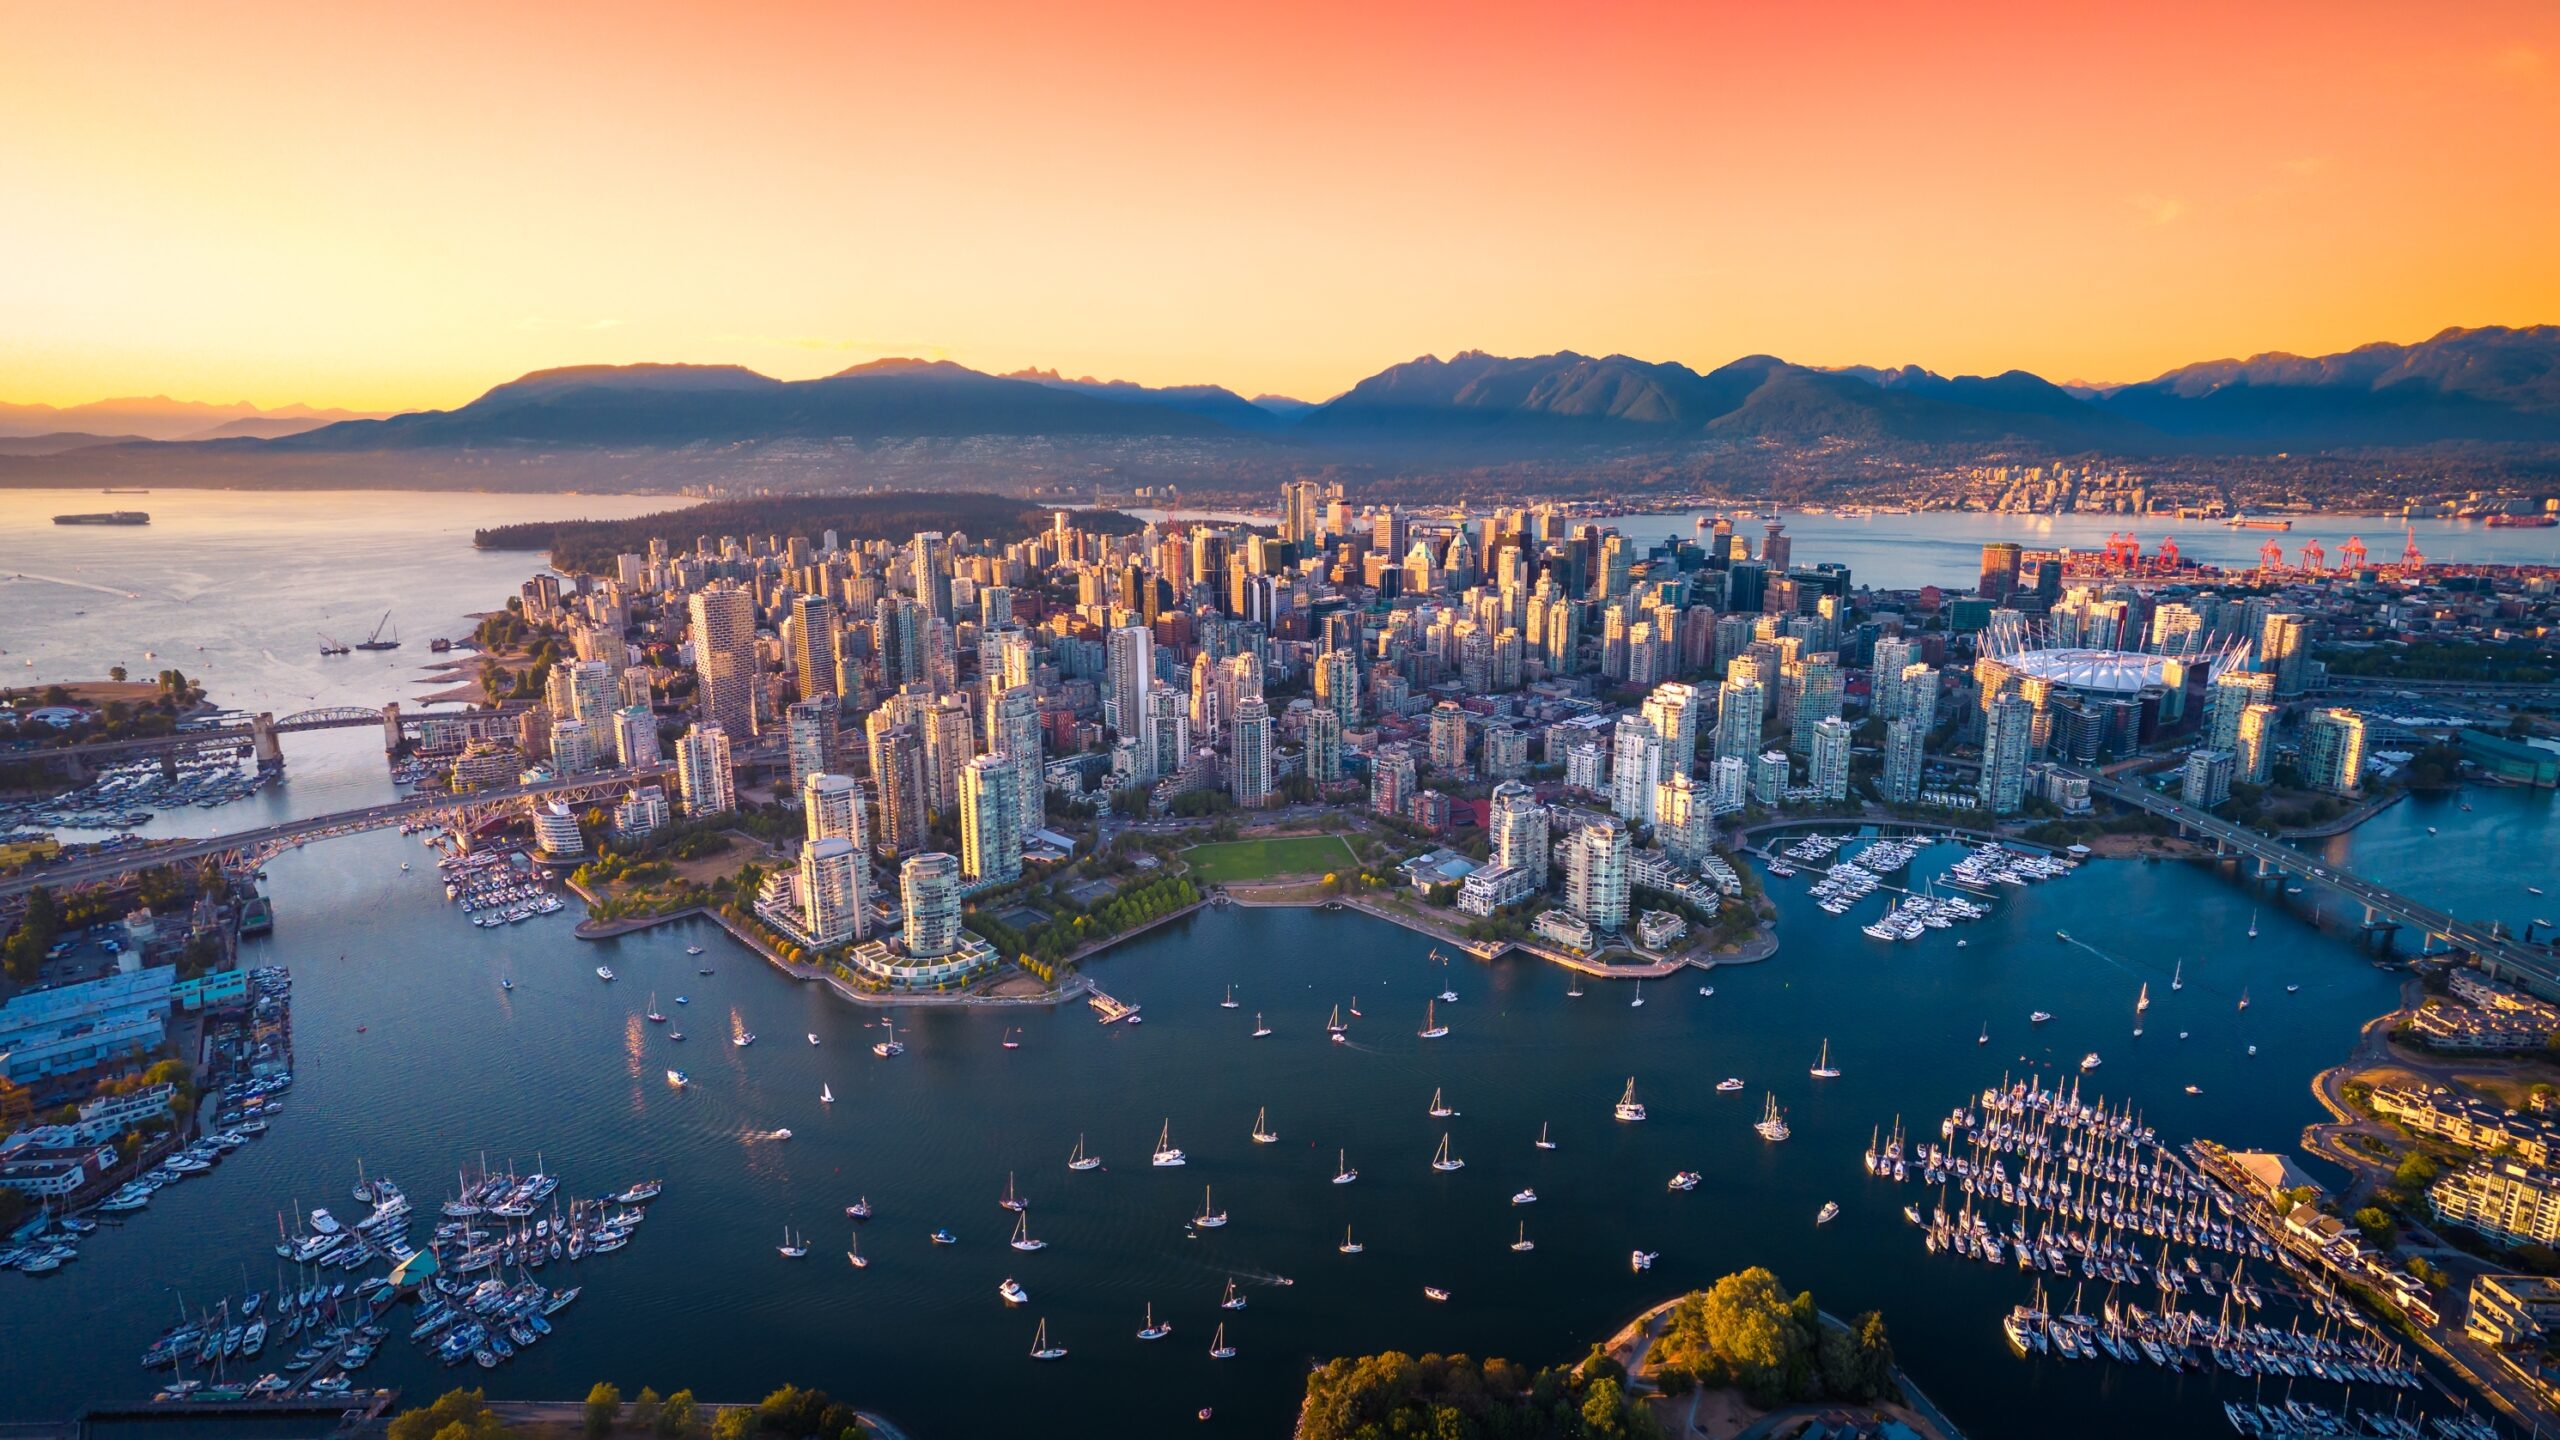 Aerial of Vancouver (Photo Credit: Engel Ching / Shutterstock)